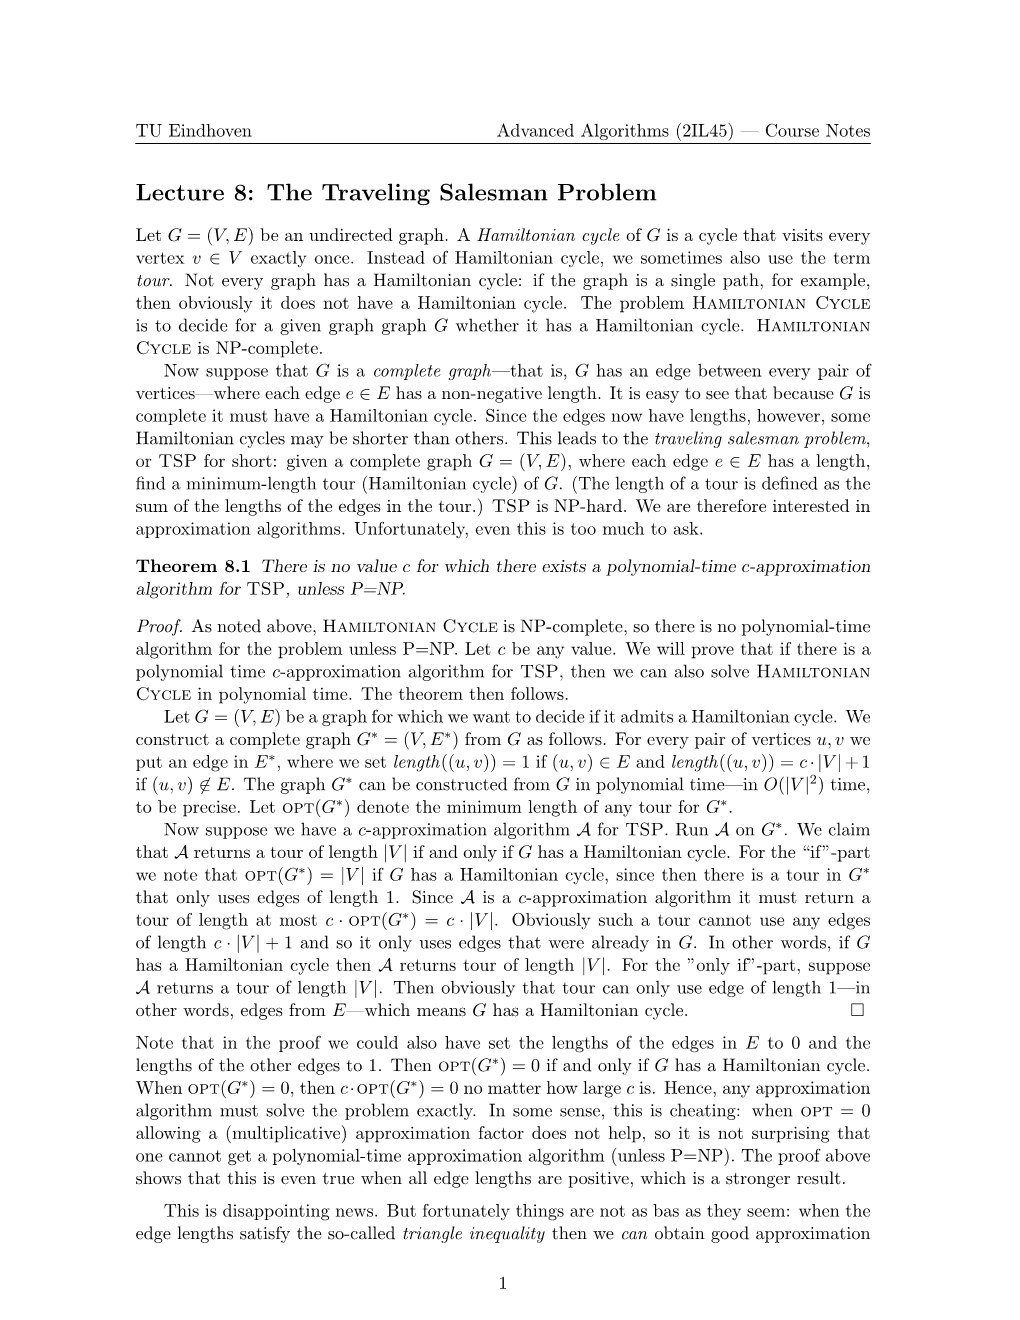 Lecture 8: the Traveling Salesman Problem